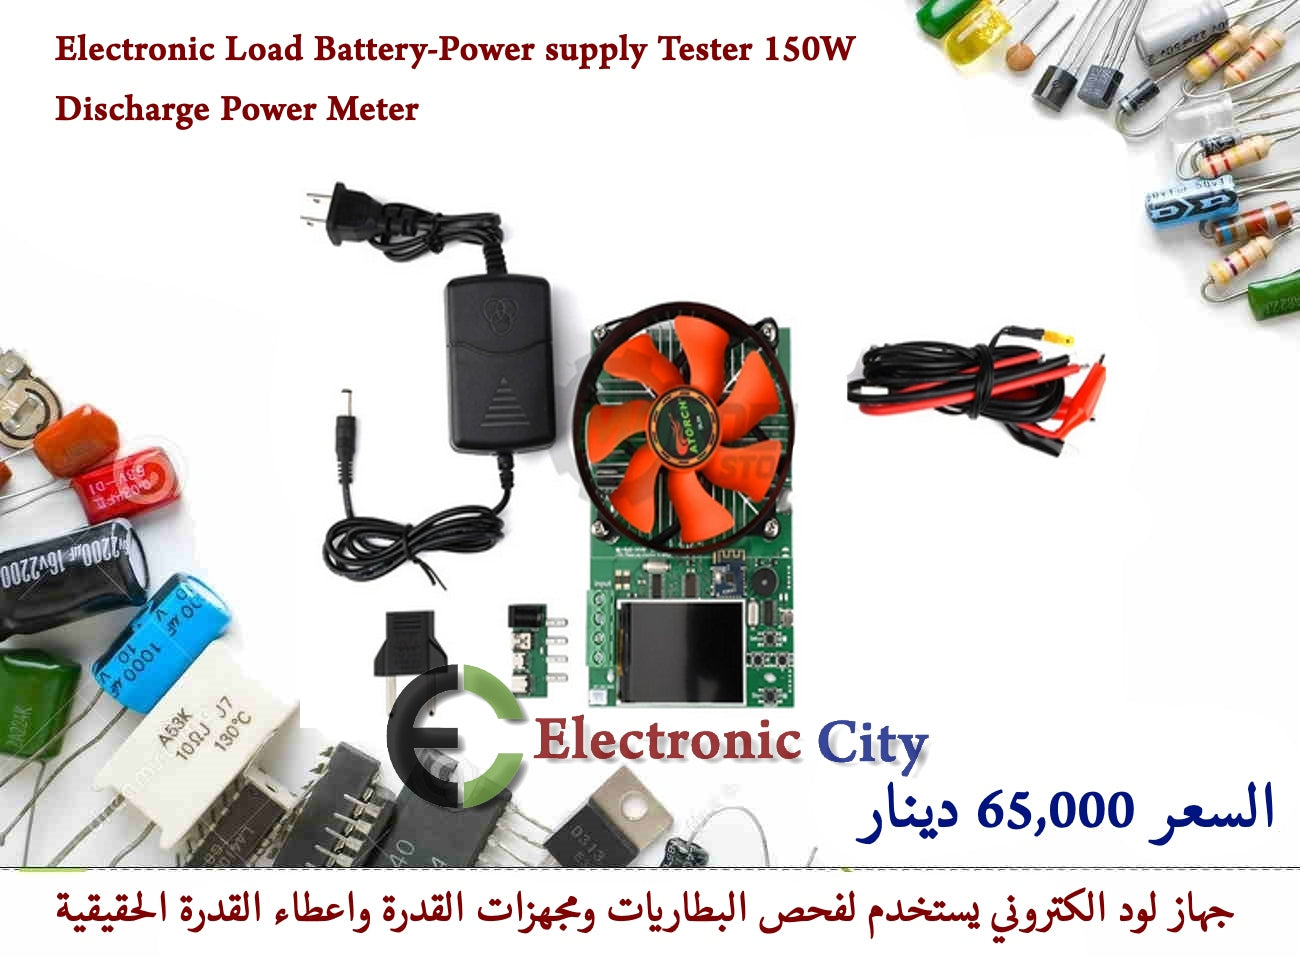 DL24 Electronic Load Battery-Power supply Tester 150W Discharge Power Meter XH0033